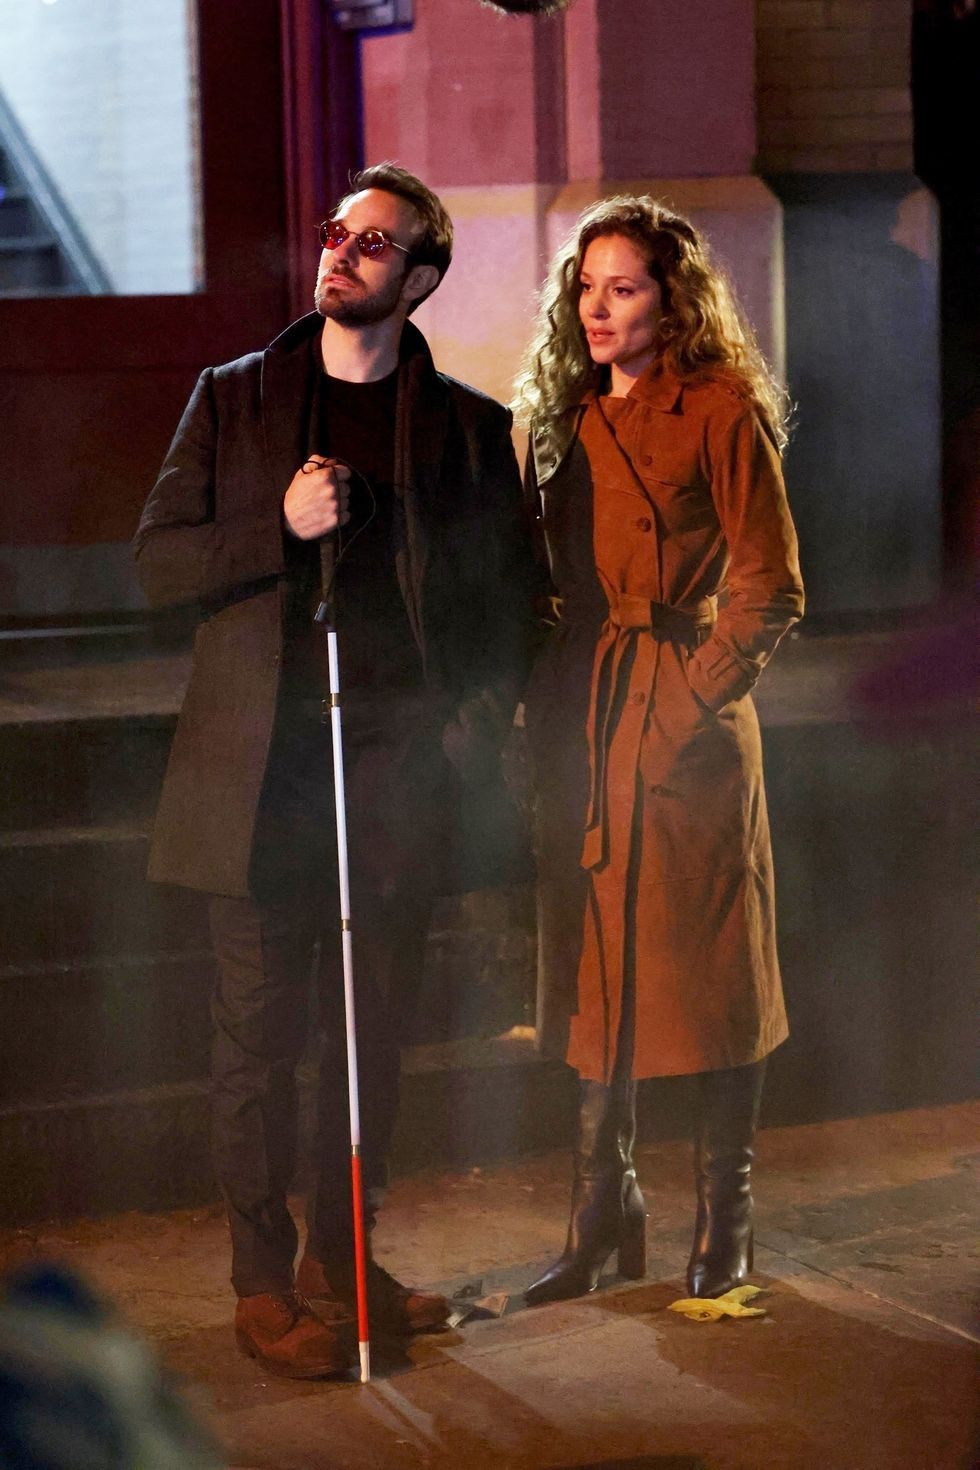 a man and woman standing next to each other and holding a microphone